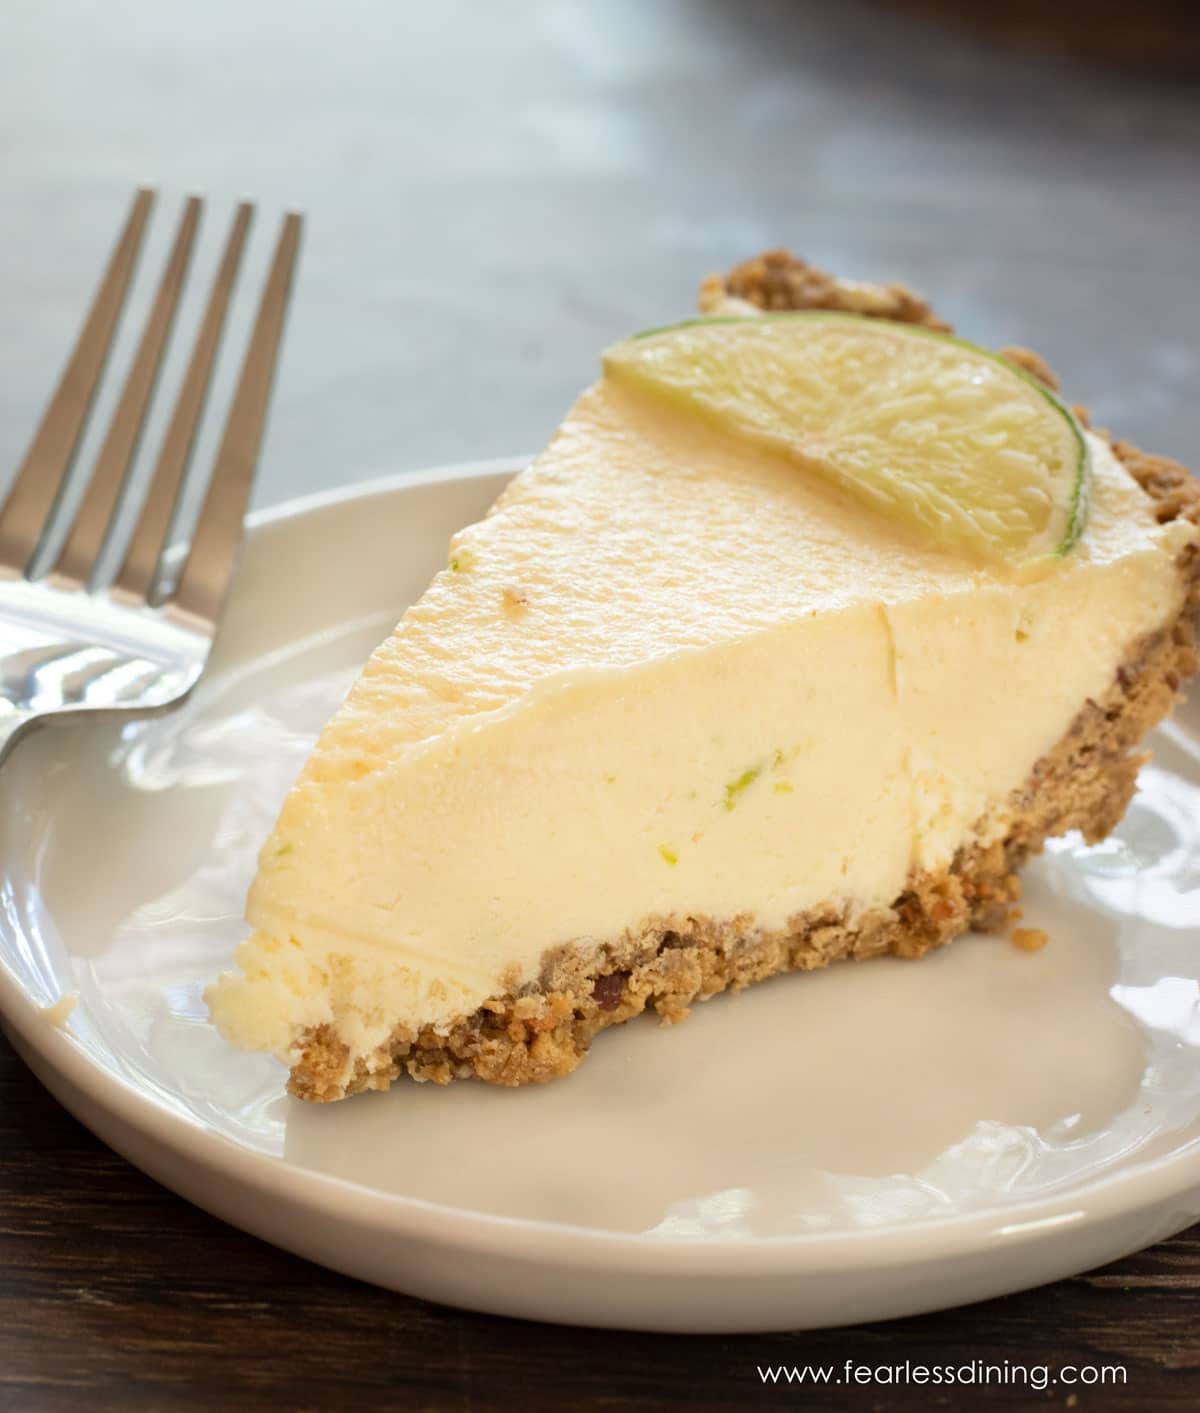 A close up photo of a slice of the key lime pie.